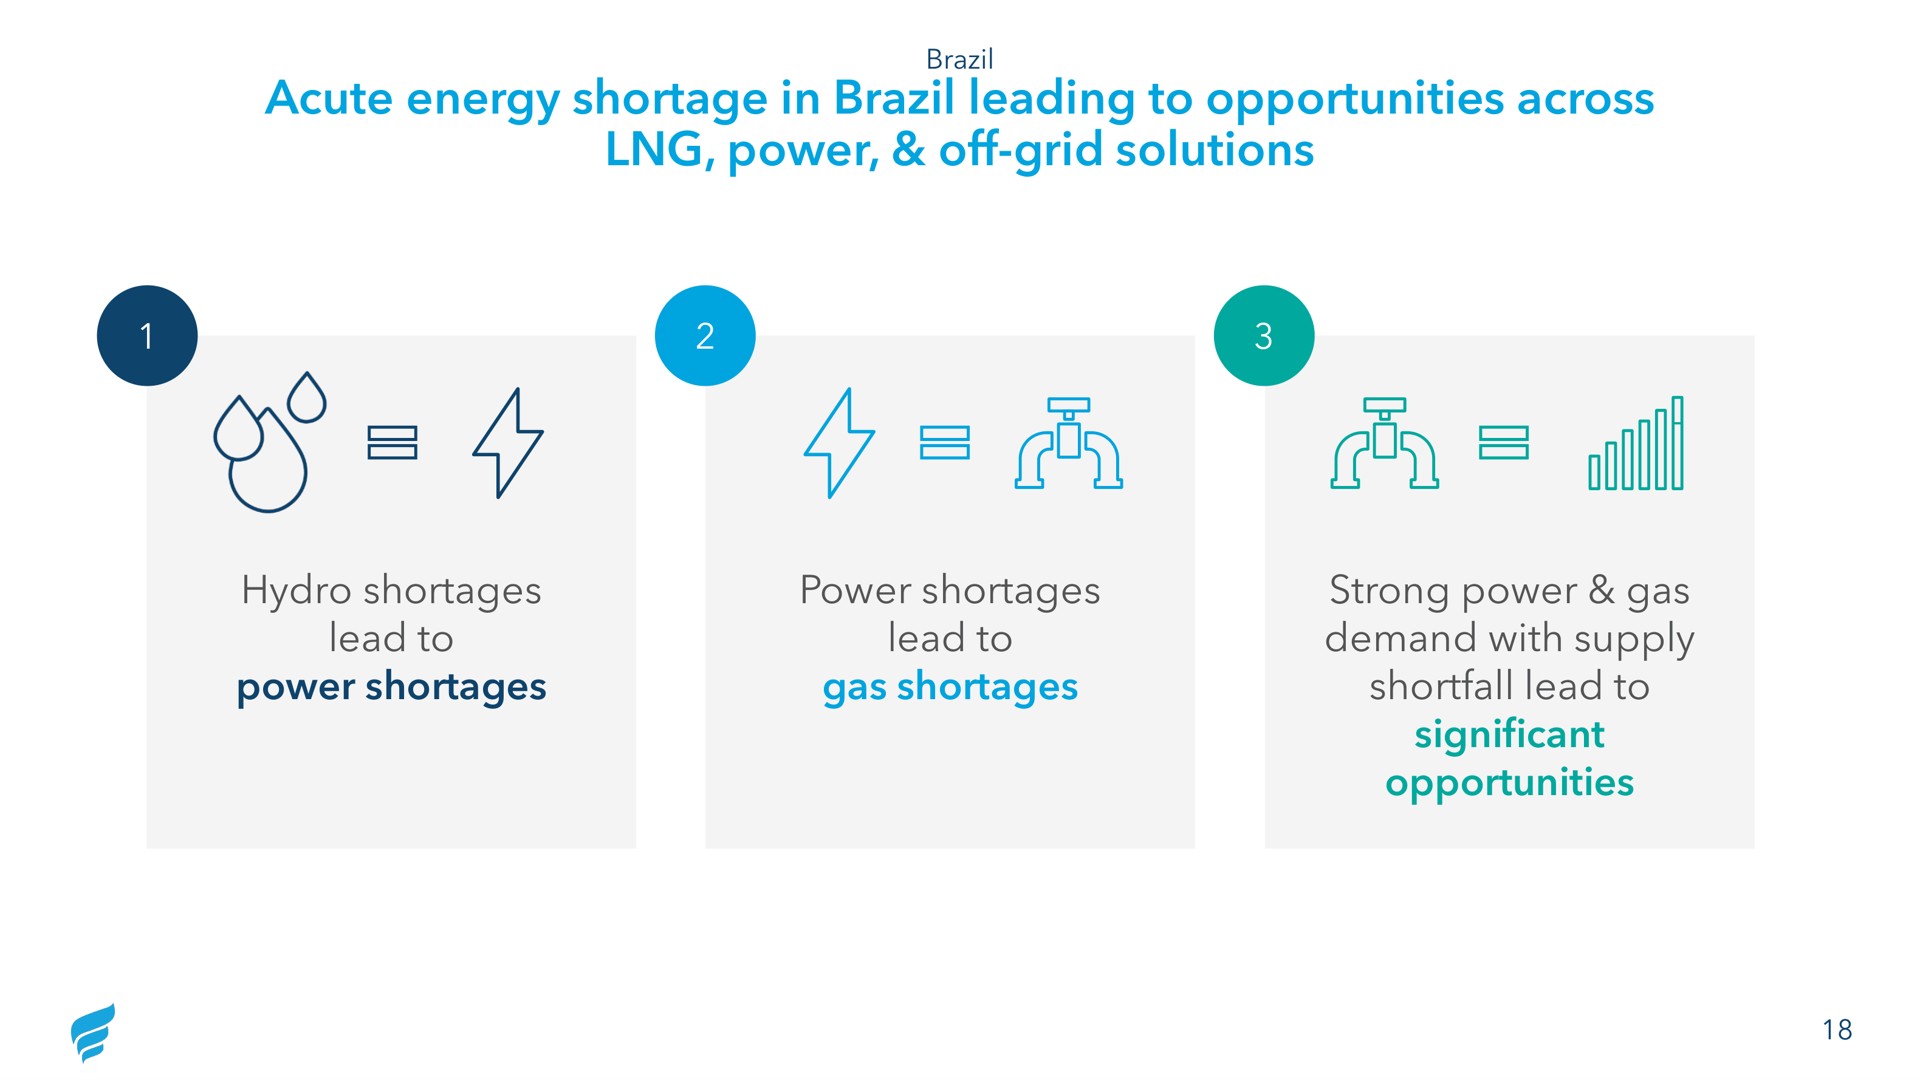 acute energy shortage in brazil leading to opportunities across power off grid solutions hydro shortages lead to power shortages power shortages lead to gas shortages strong power gas demand with supply shortfall lead to significant opportunities | NewFortress Energy